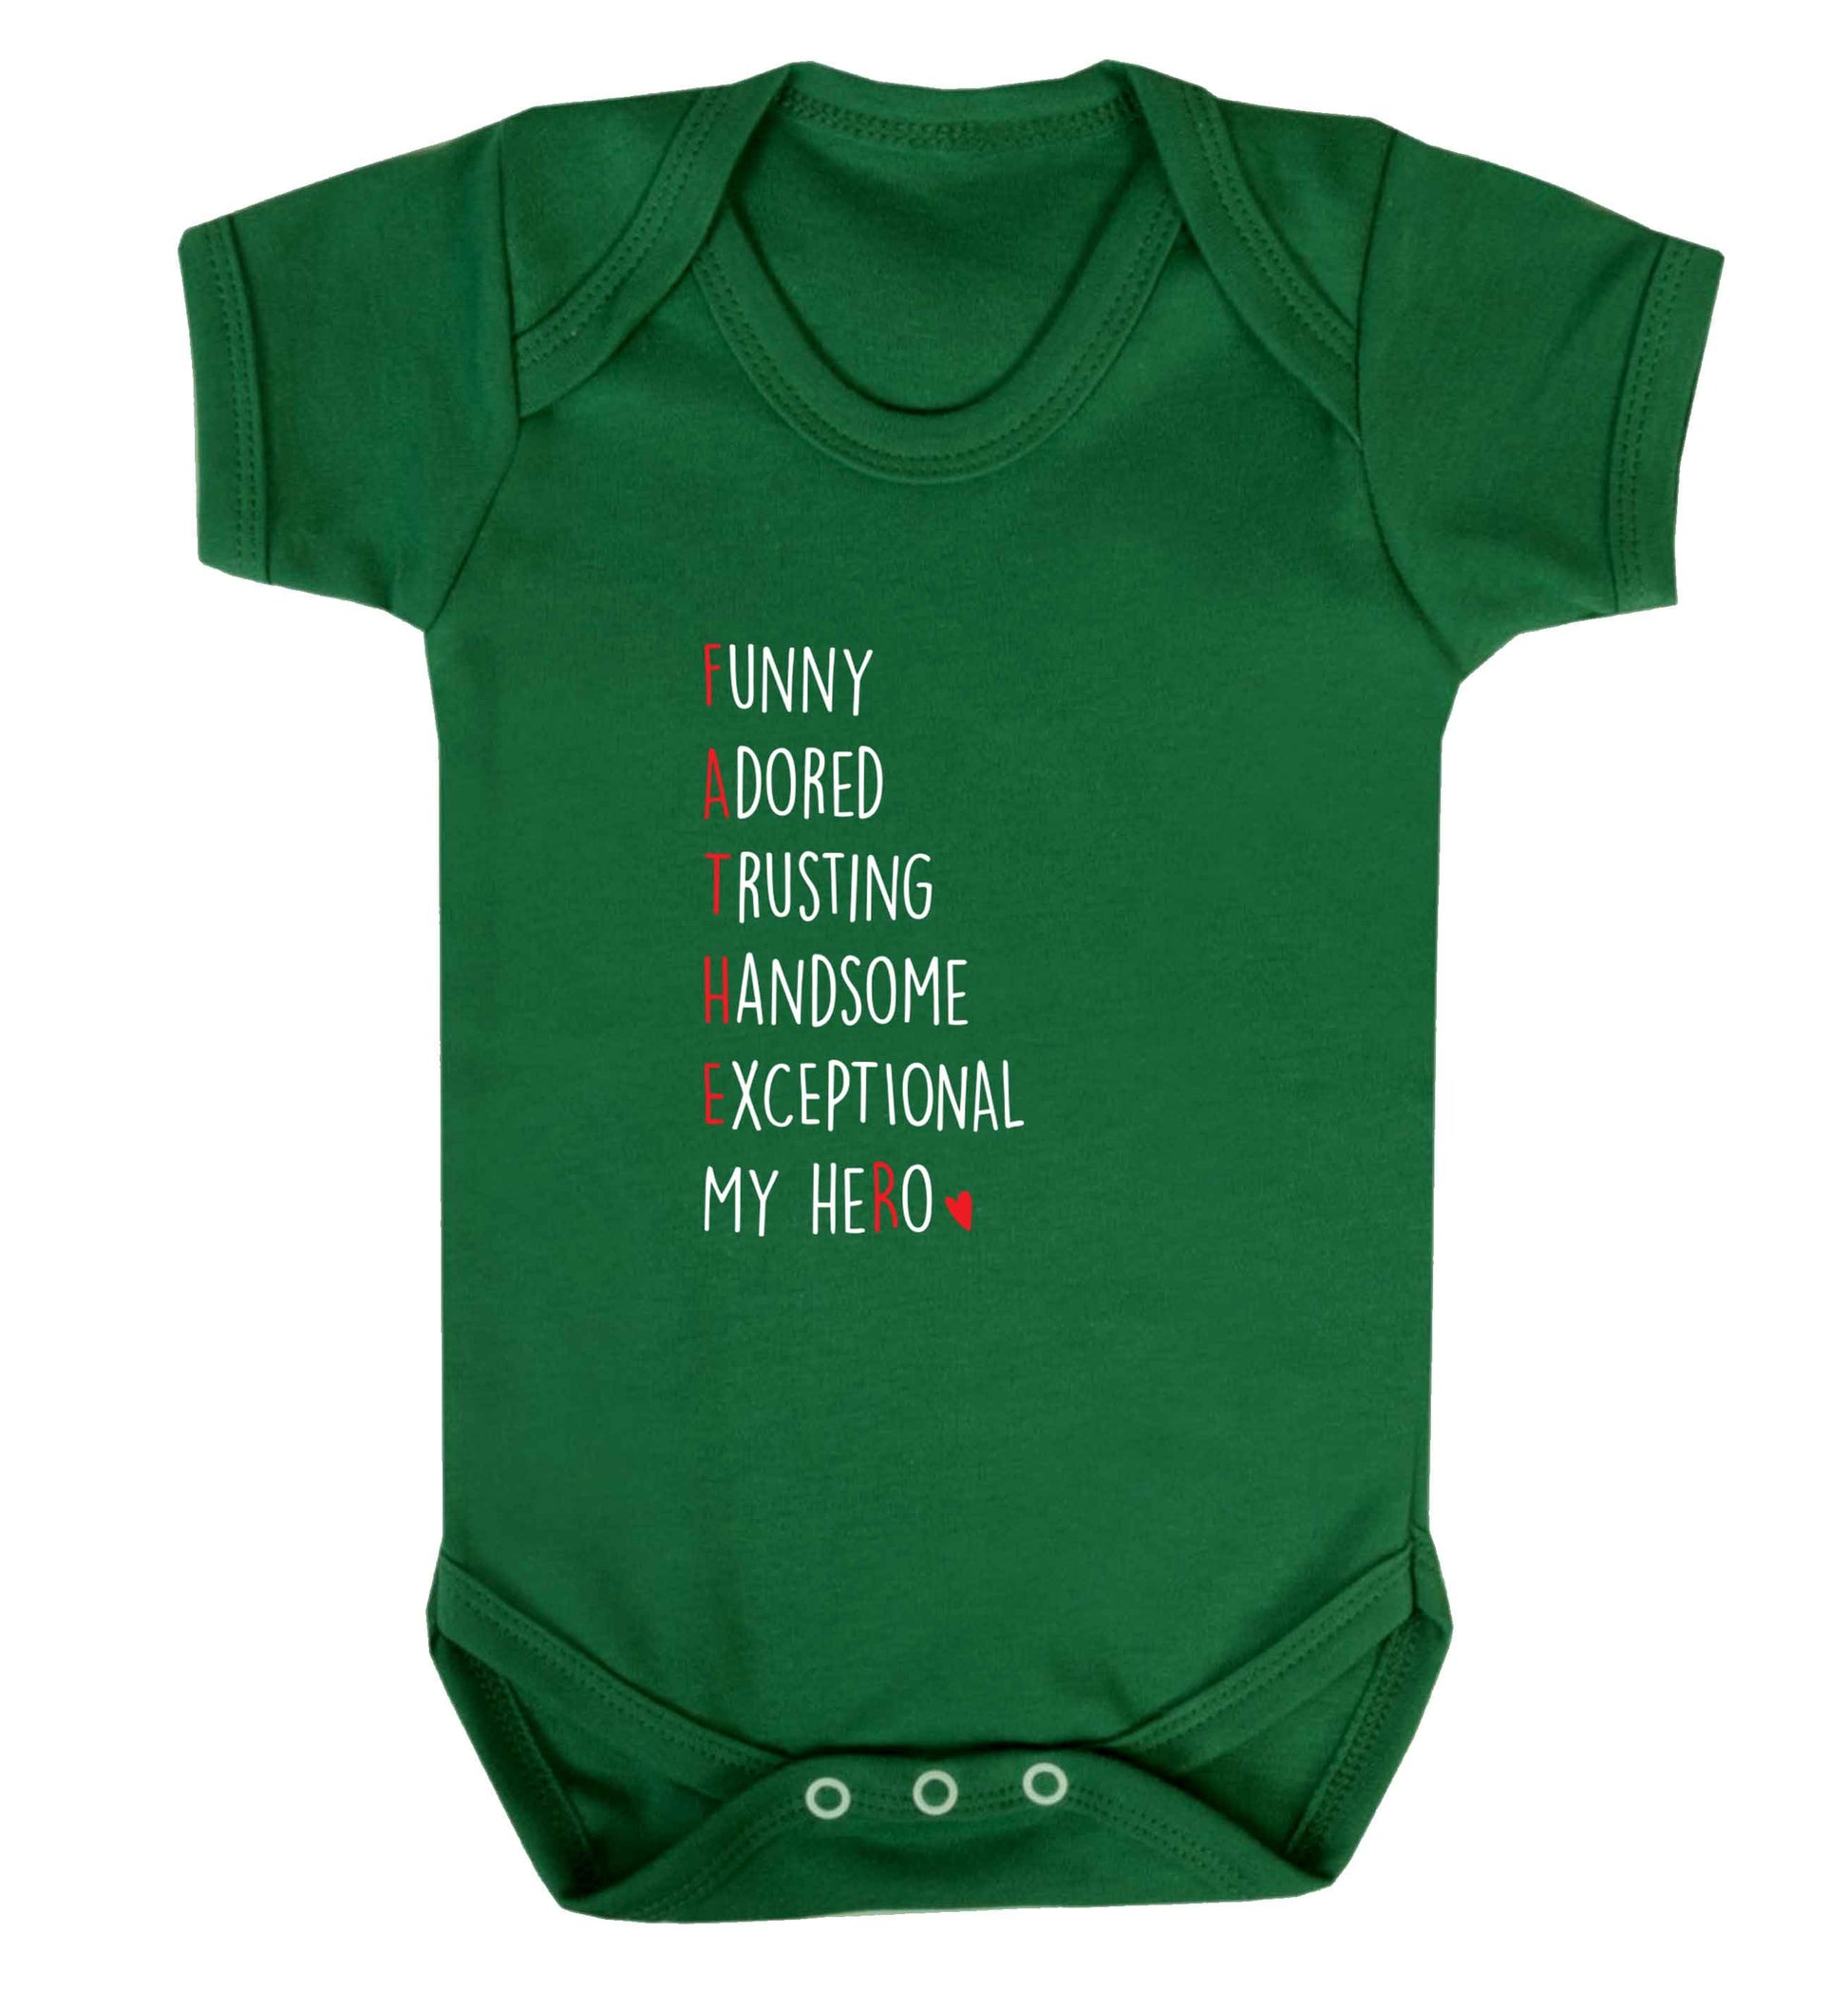 Father, funny adored trusting handsome exceptional my hero baby vest green 18-24 months